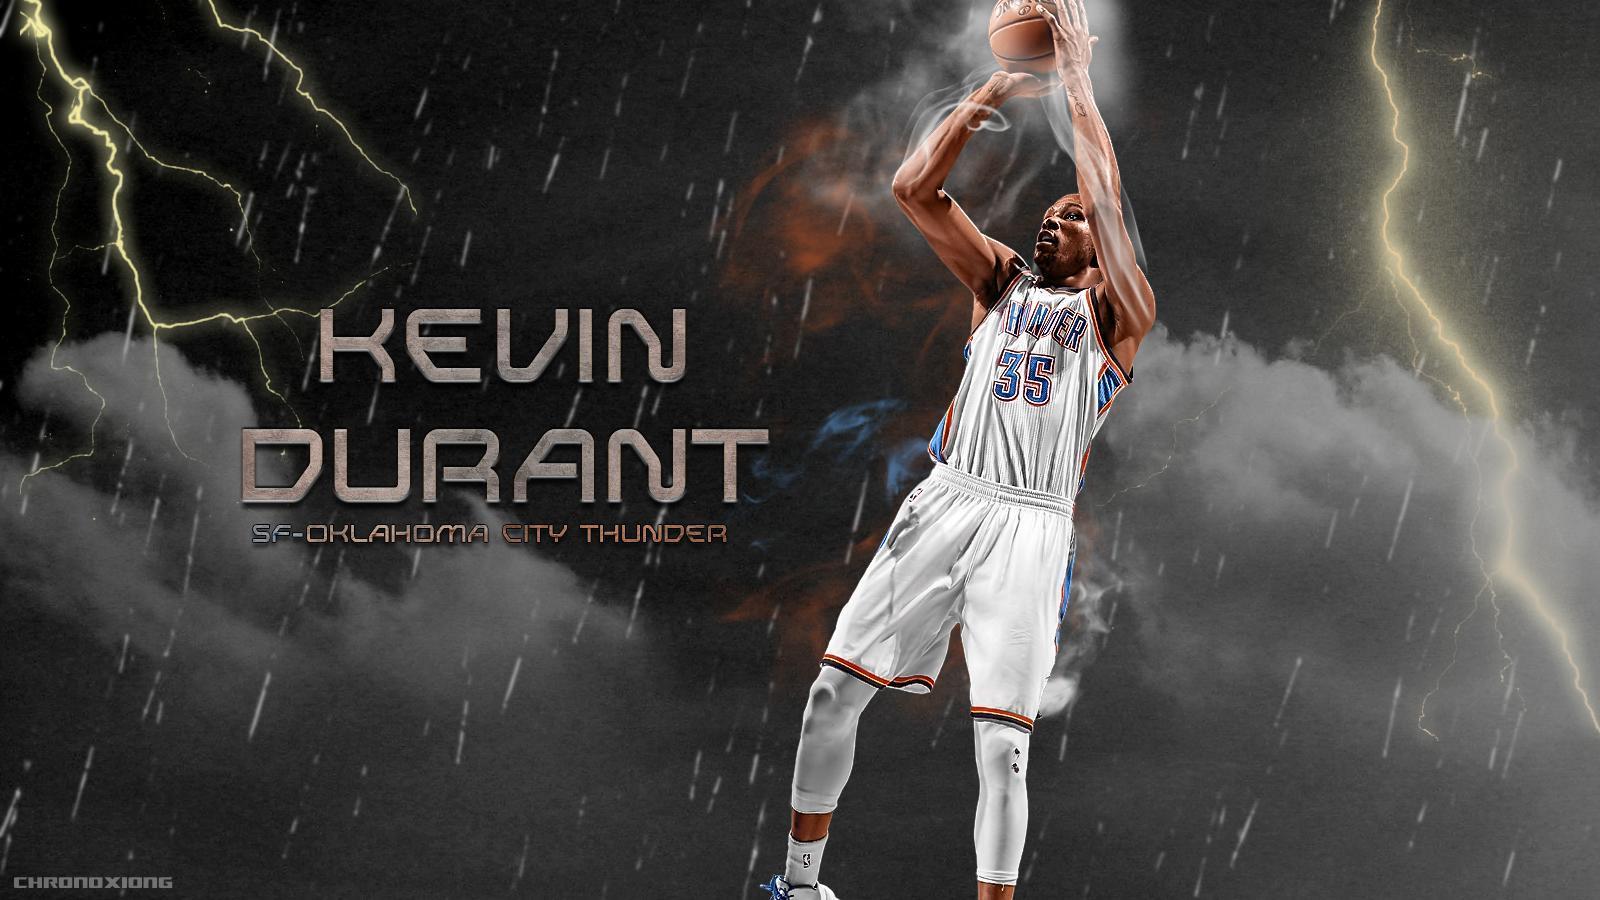 Kevin Durant Wallpaper  Kevin durant wallpapers, Nba kevin durant